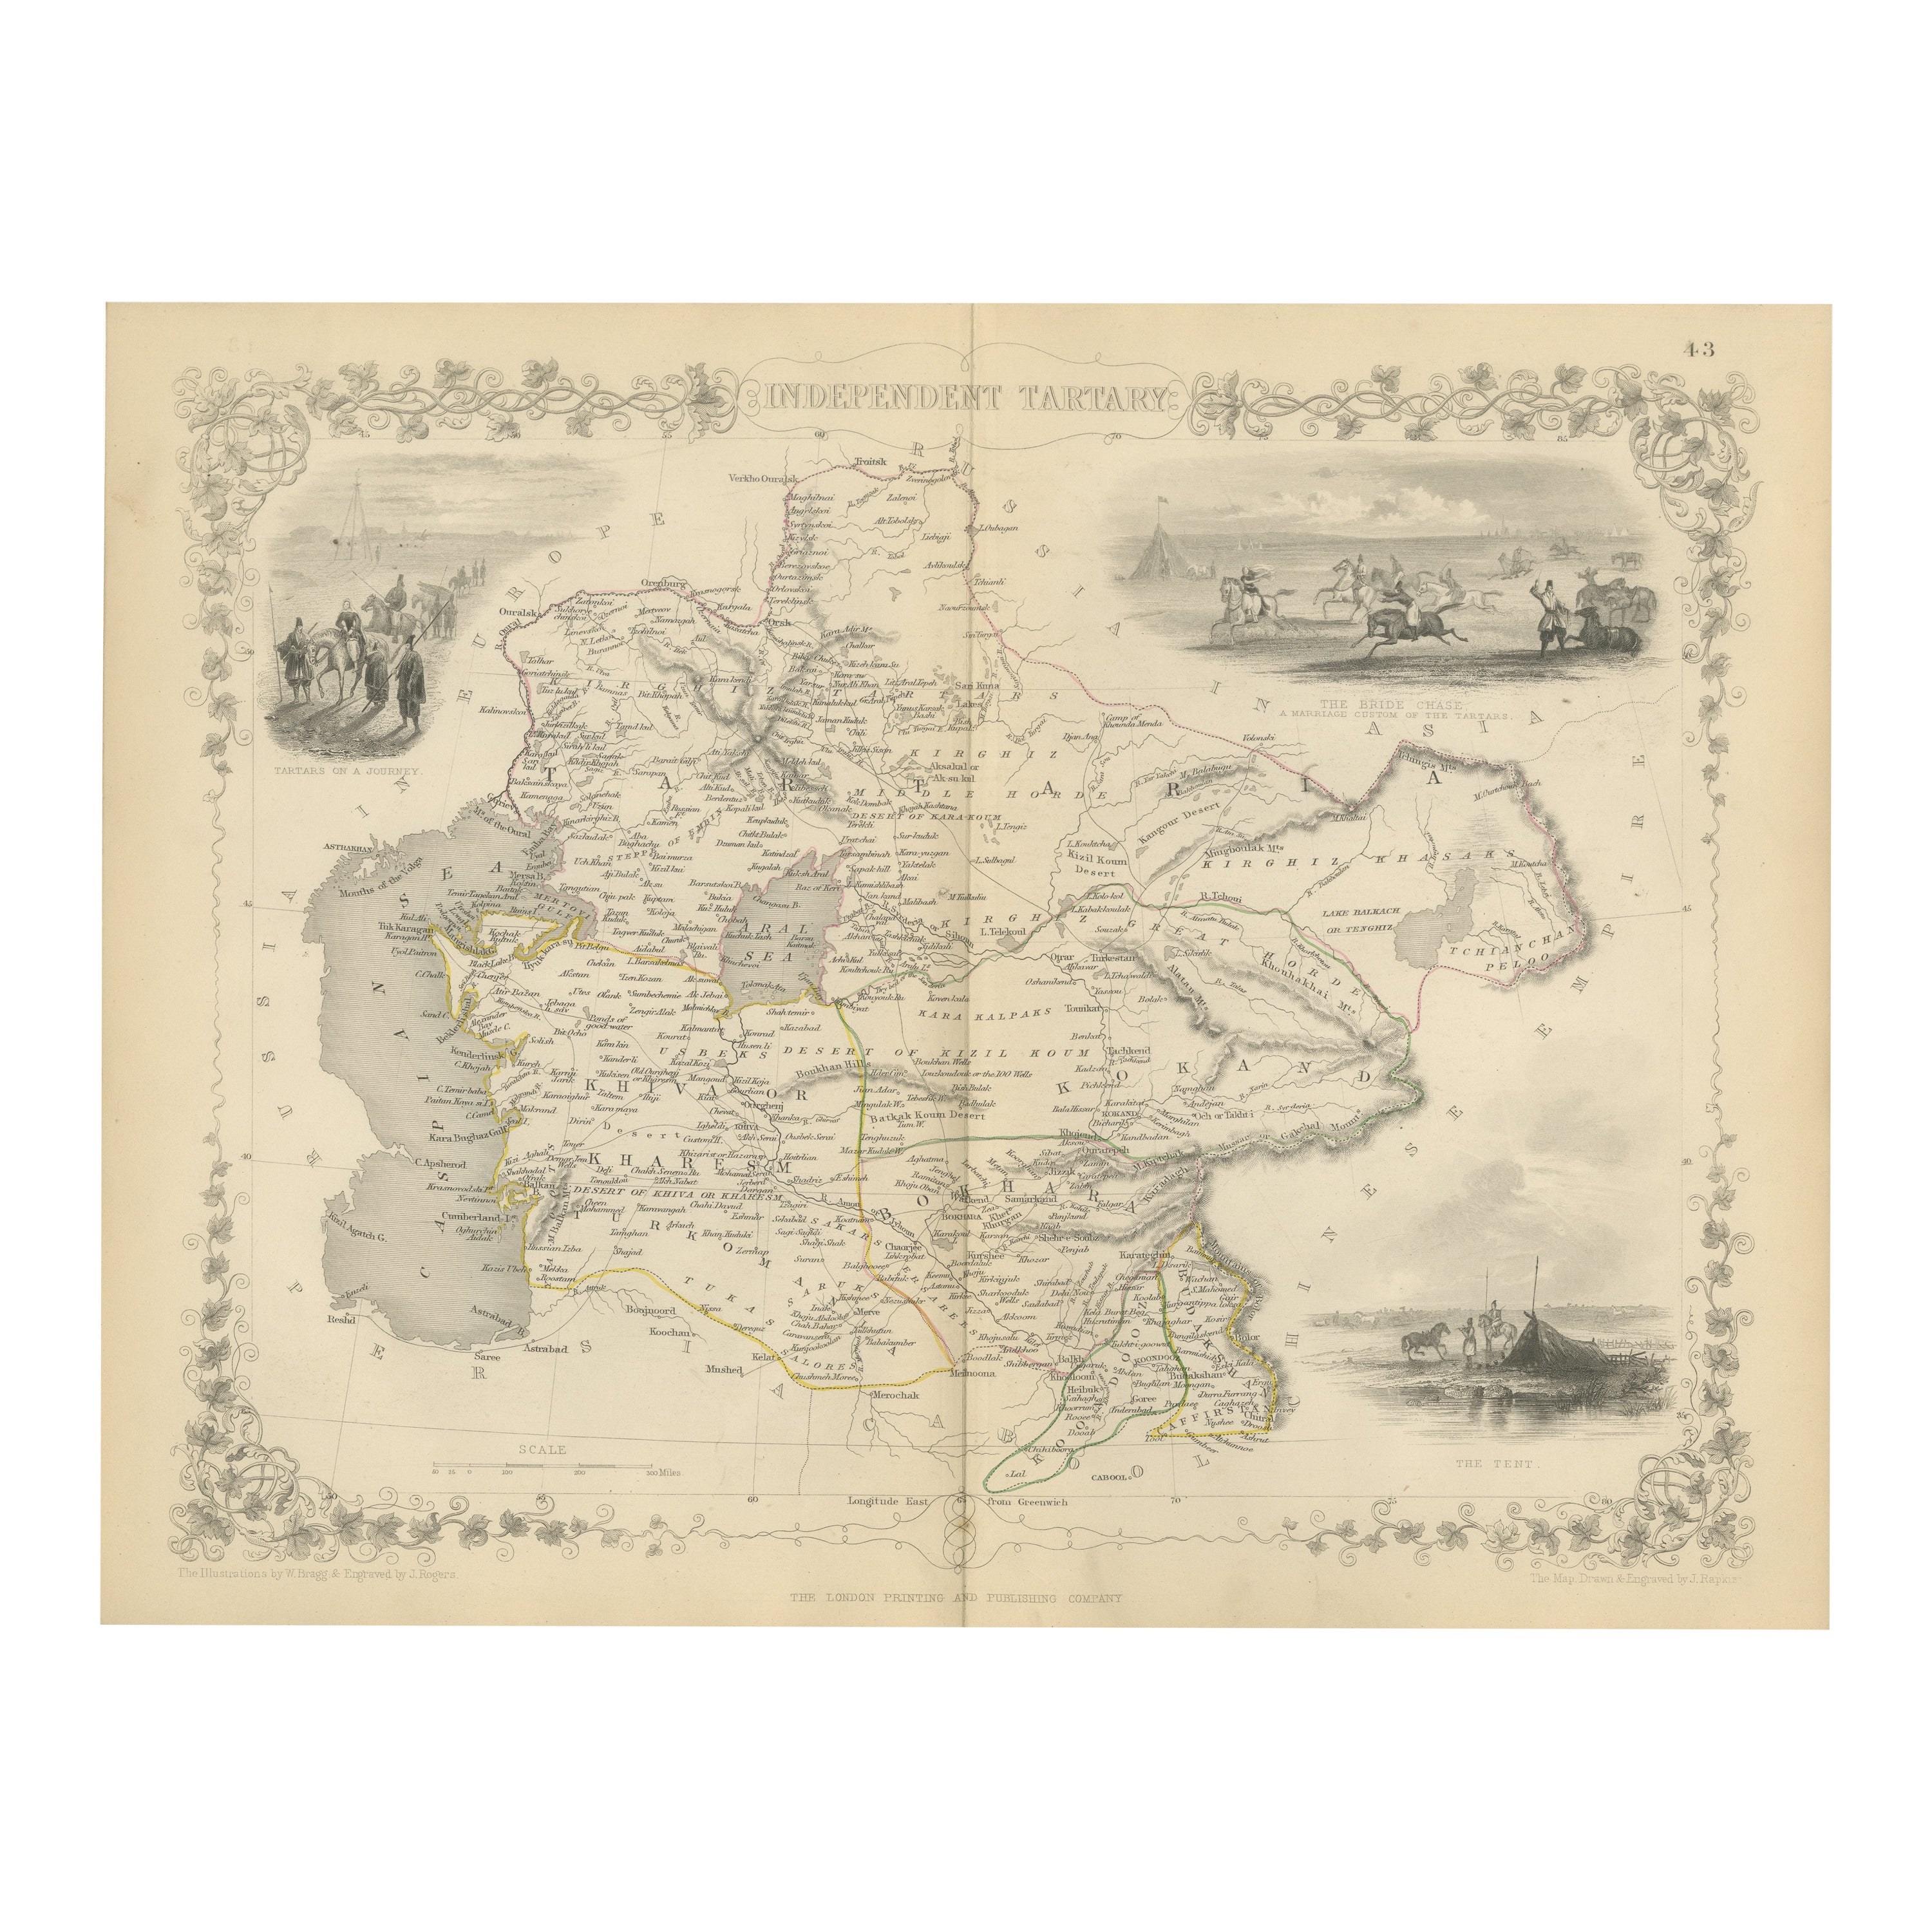 Map of Independent Tartary with Vignettes of the Region's Culture, 1851 For Sale